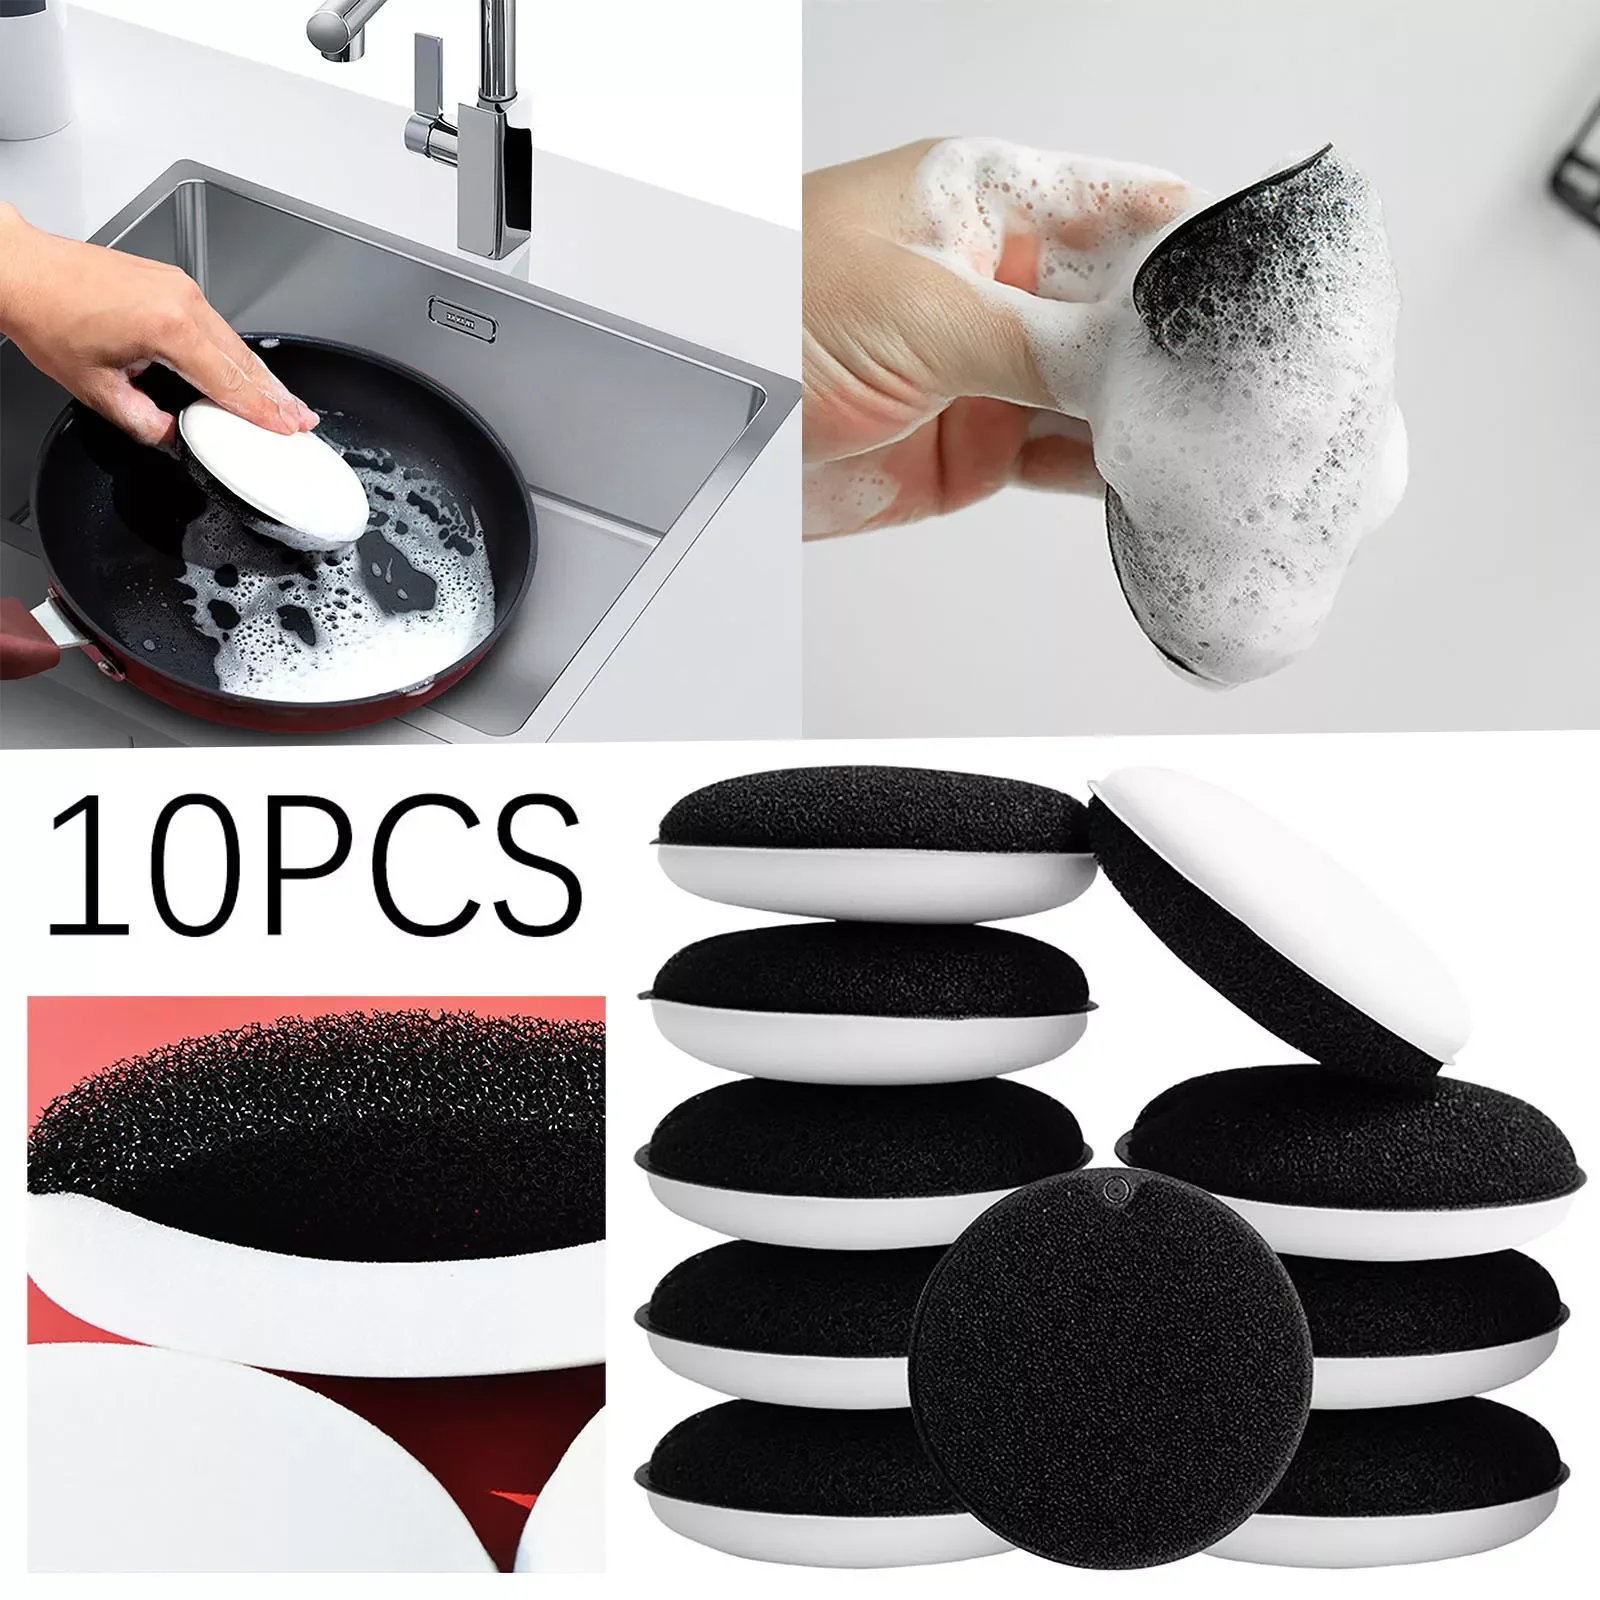 

NEW IN 10PCS Kitchen Cleaning Tools Tile Brushes for Cleaning Grout Stainless Steel Wipes for Stove Laundry Stain Remover Brush